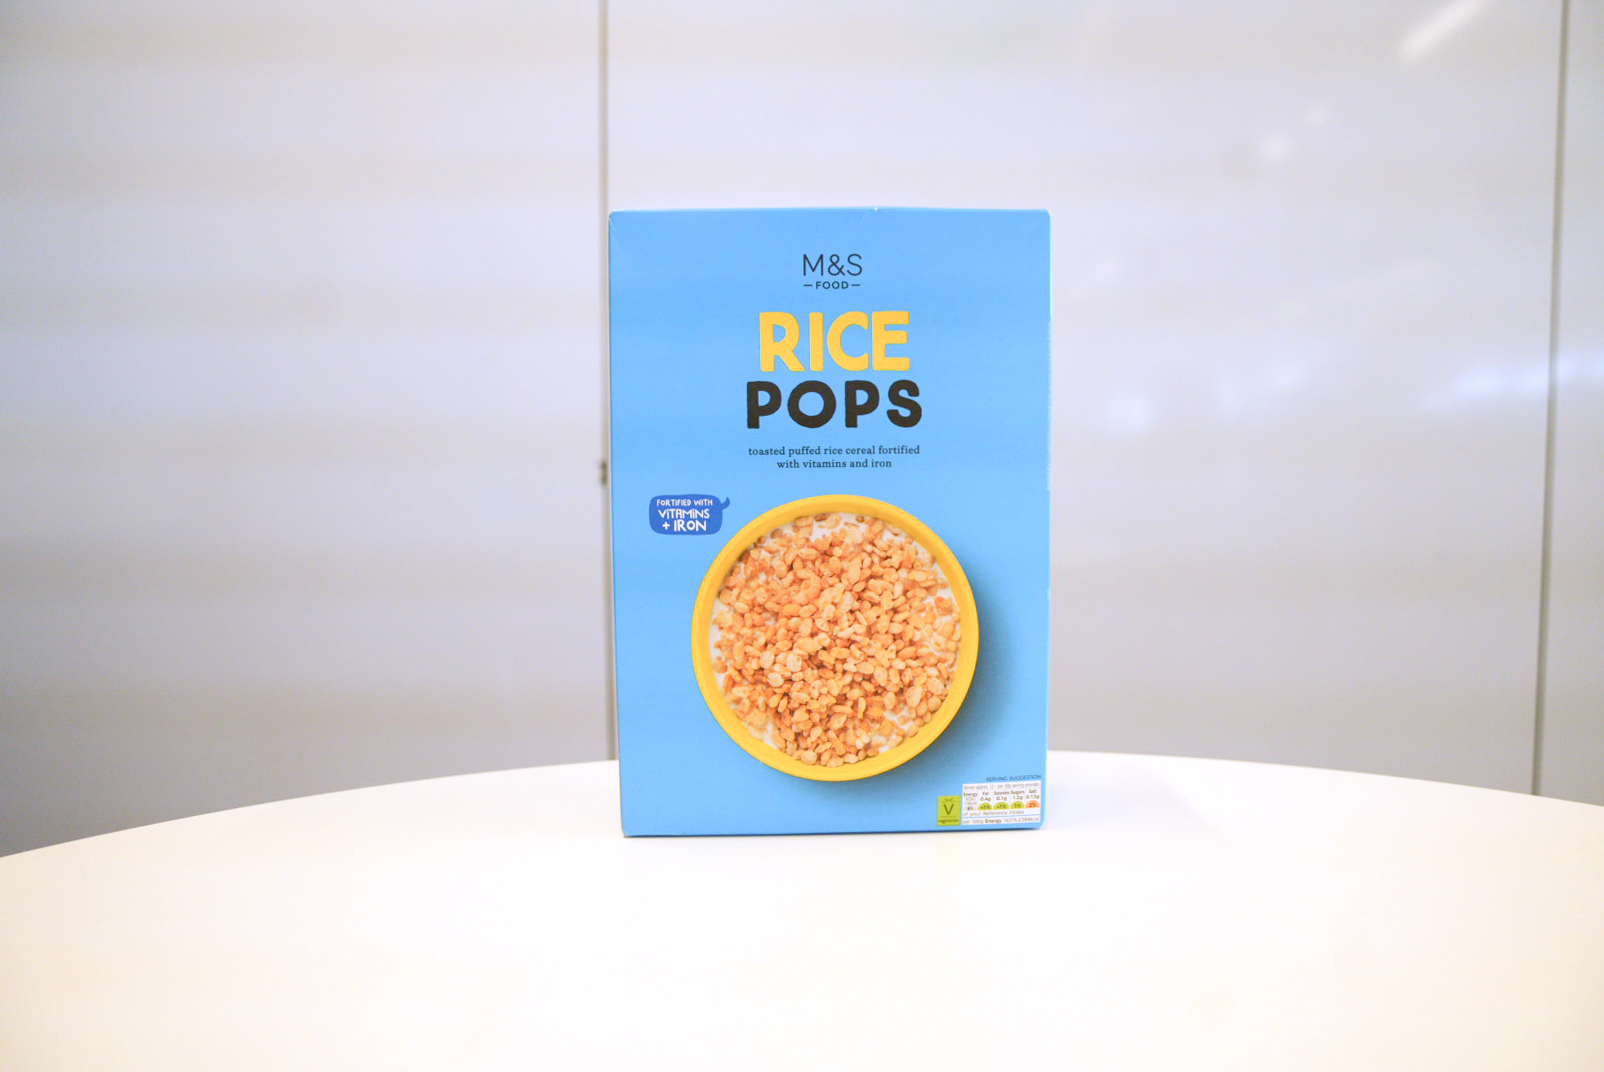 M&S' rice pops were a bit sandy and bitty ton the tongue